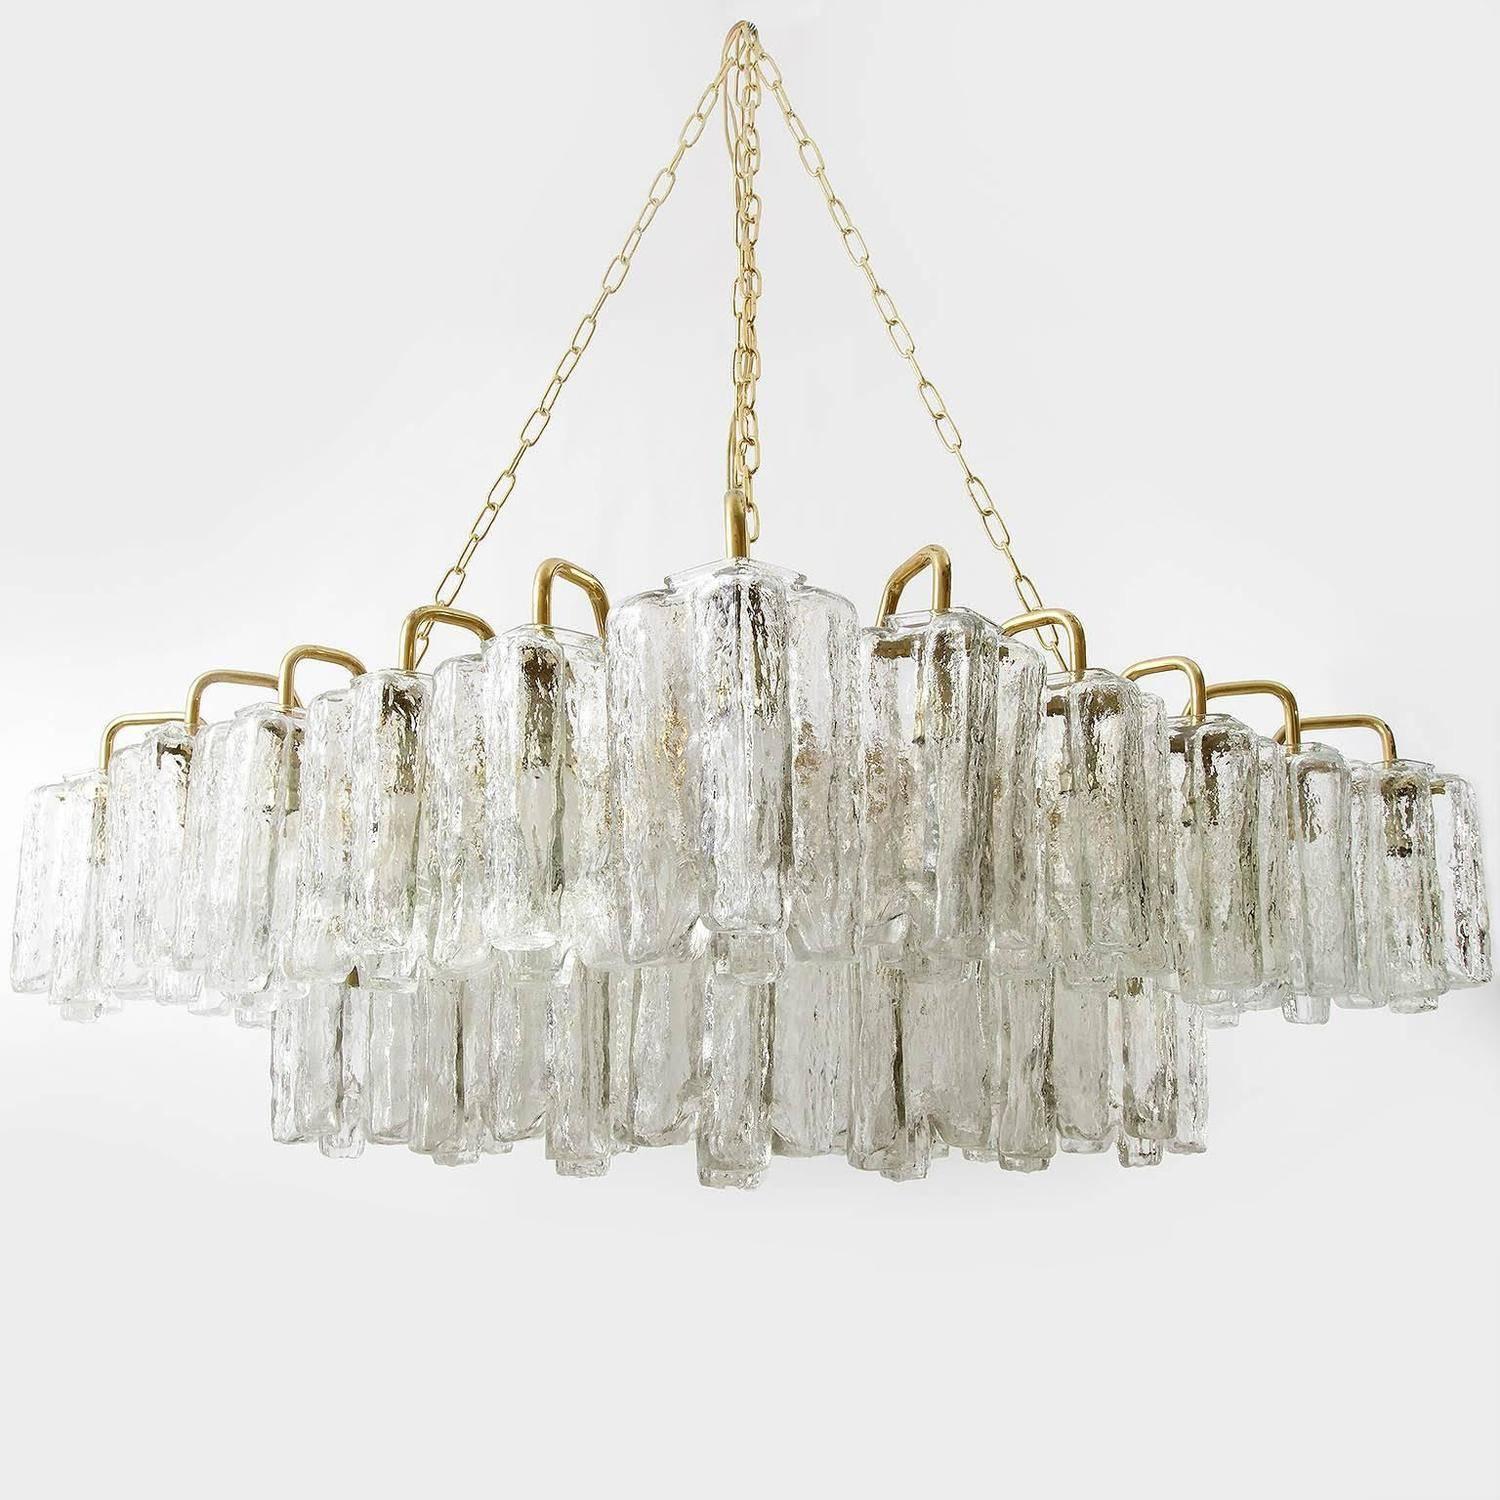 One of four square and extra large 'Granada' (engl. 'Grenada') light fixtures by J.T. Kalmar, Austria, manufactured in midcentury, circa 1970 (late 1960s or early 1970s).
The lamps can be used as pendant light / chandelier or as flushmount light